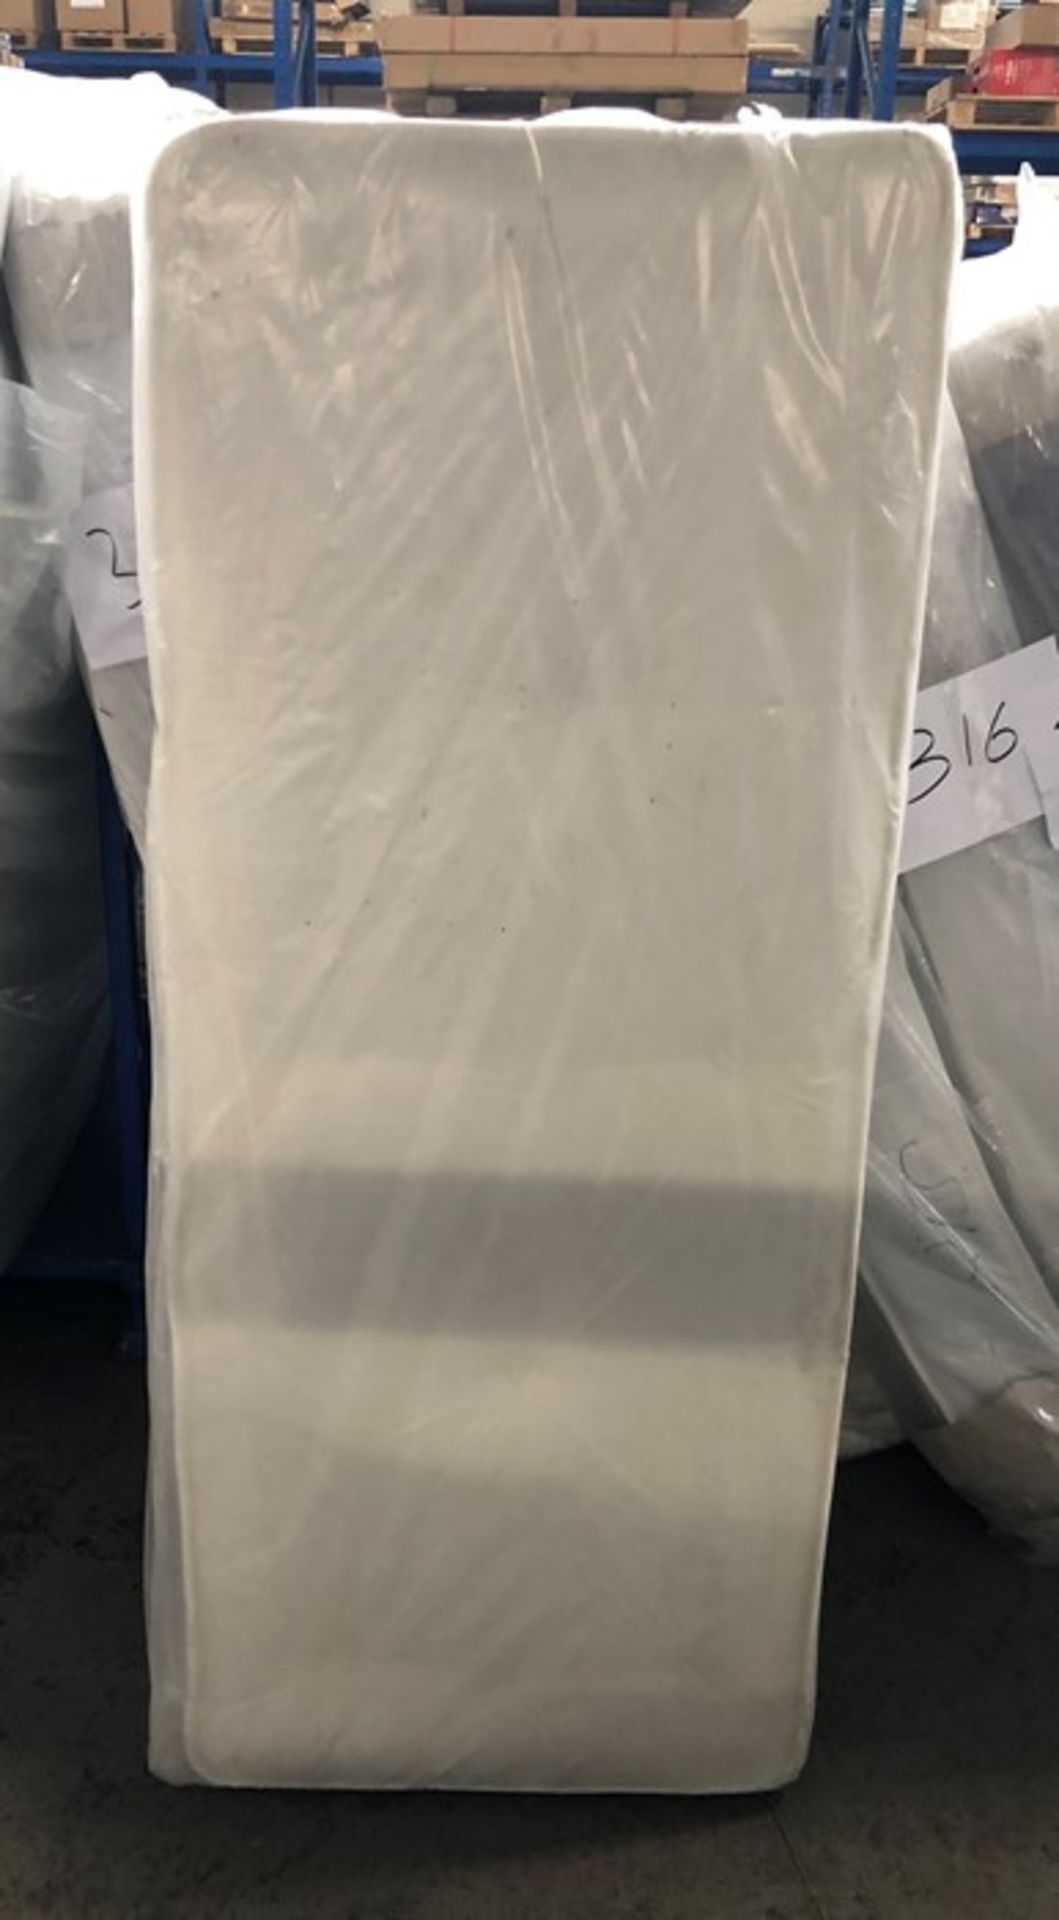 1 BAGGED SMALL EUROPEAN SINGLE POCKET SPRUNG MATTRESS (PUBLIC VIEWING AVAILABLE)